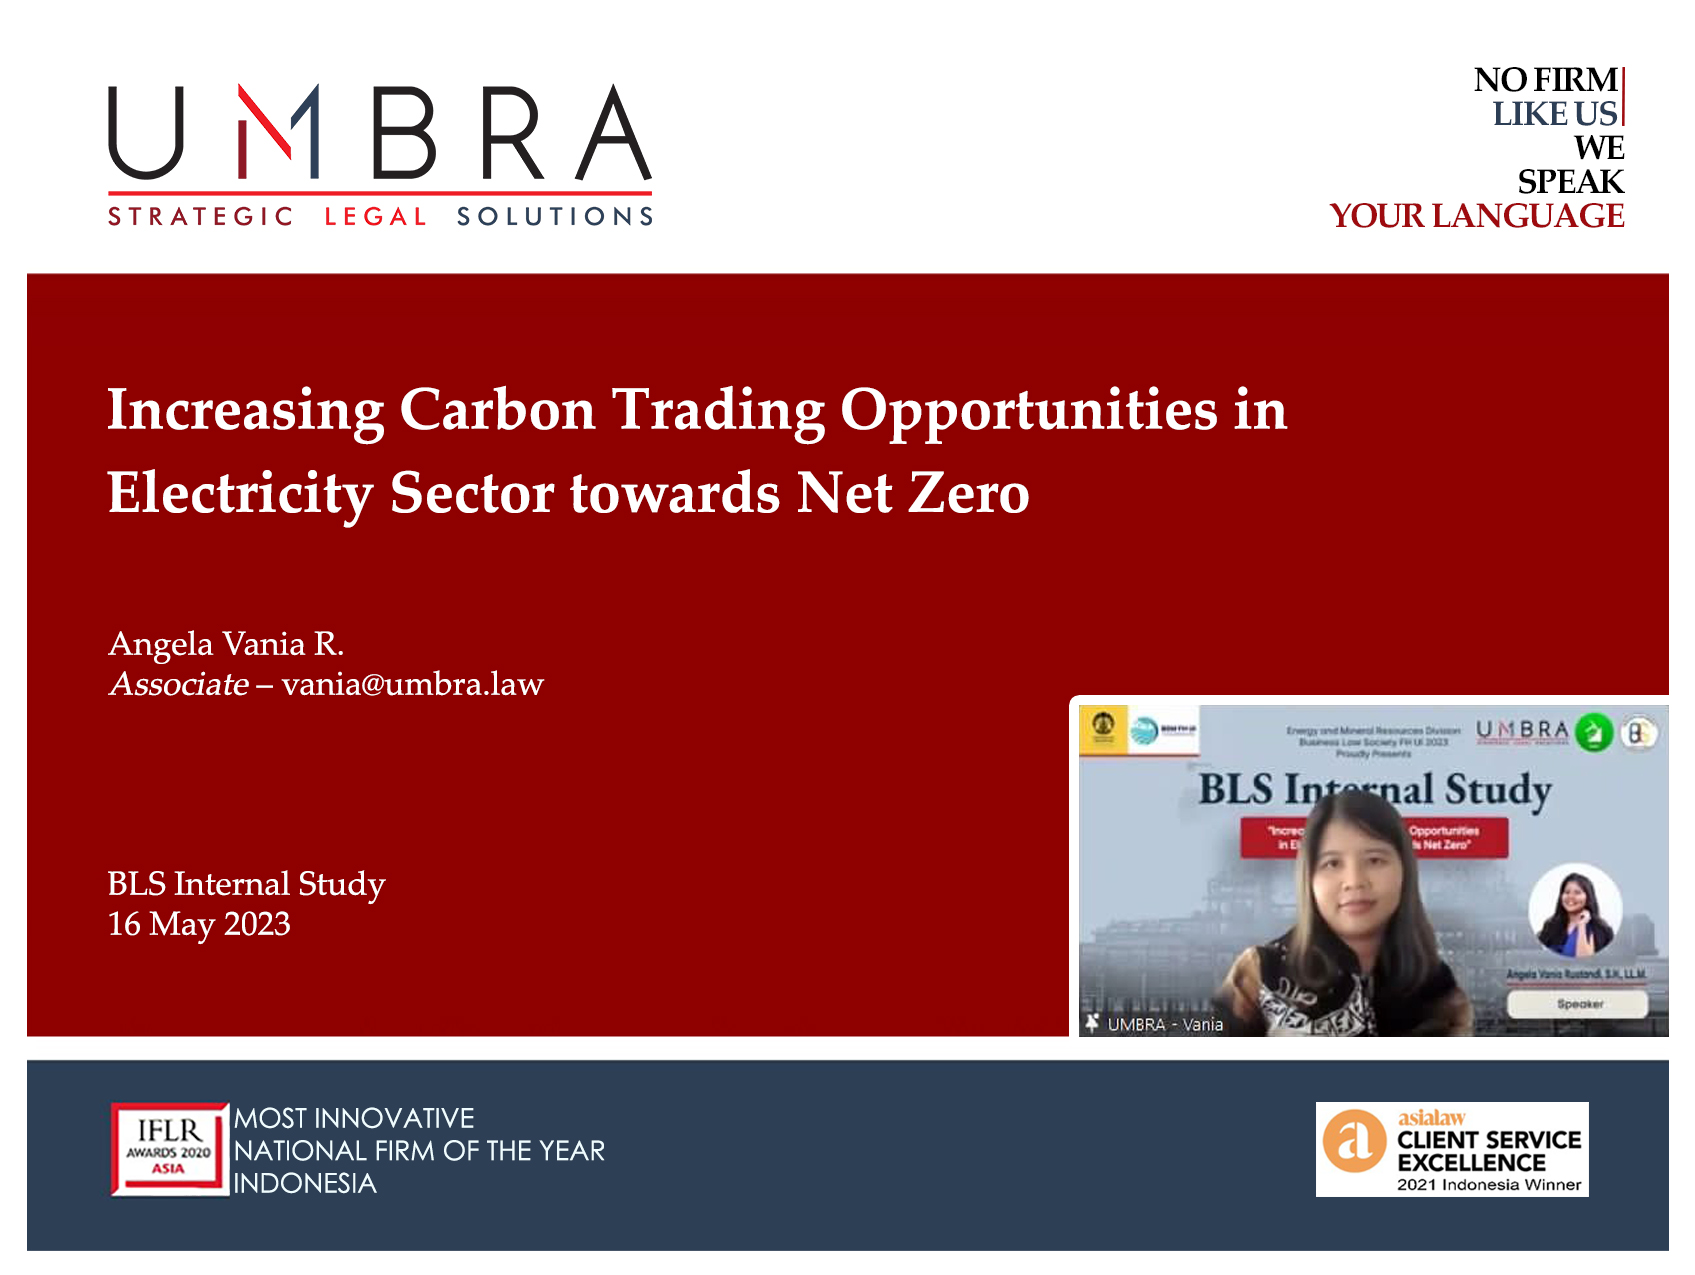 BLS Internal Study “Increasing Carbon Trading Opportunities in Electricity Sector towards Net Zero”